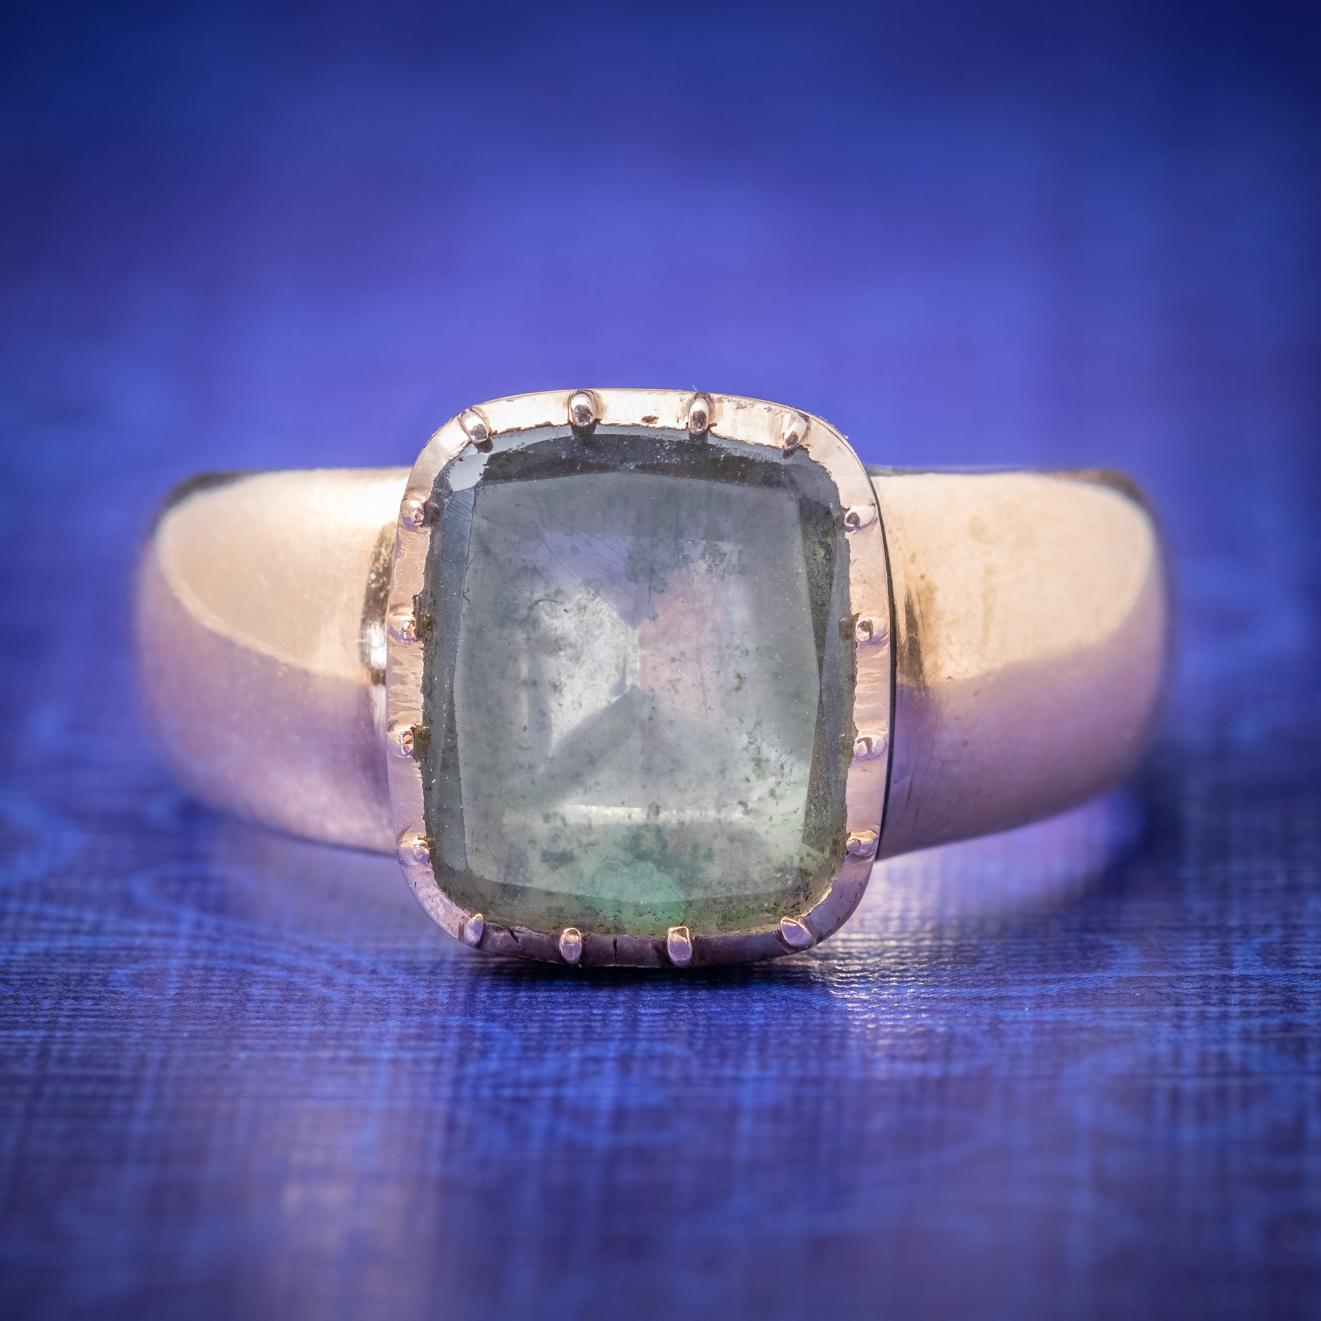 A grand antique Ring from the Georgian era adorned with a foil backed Rock Crystal which is a clear colourless form of Quartz that is highly durable and once believed by ancients to be a form of solidified ice that could never be thawed. The stone